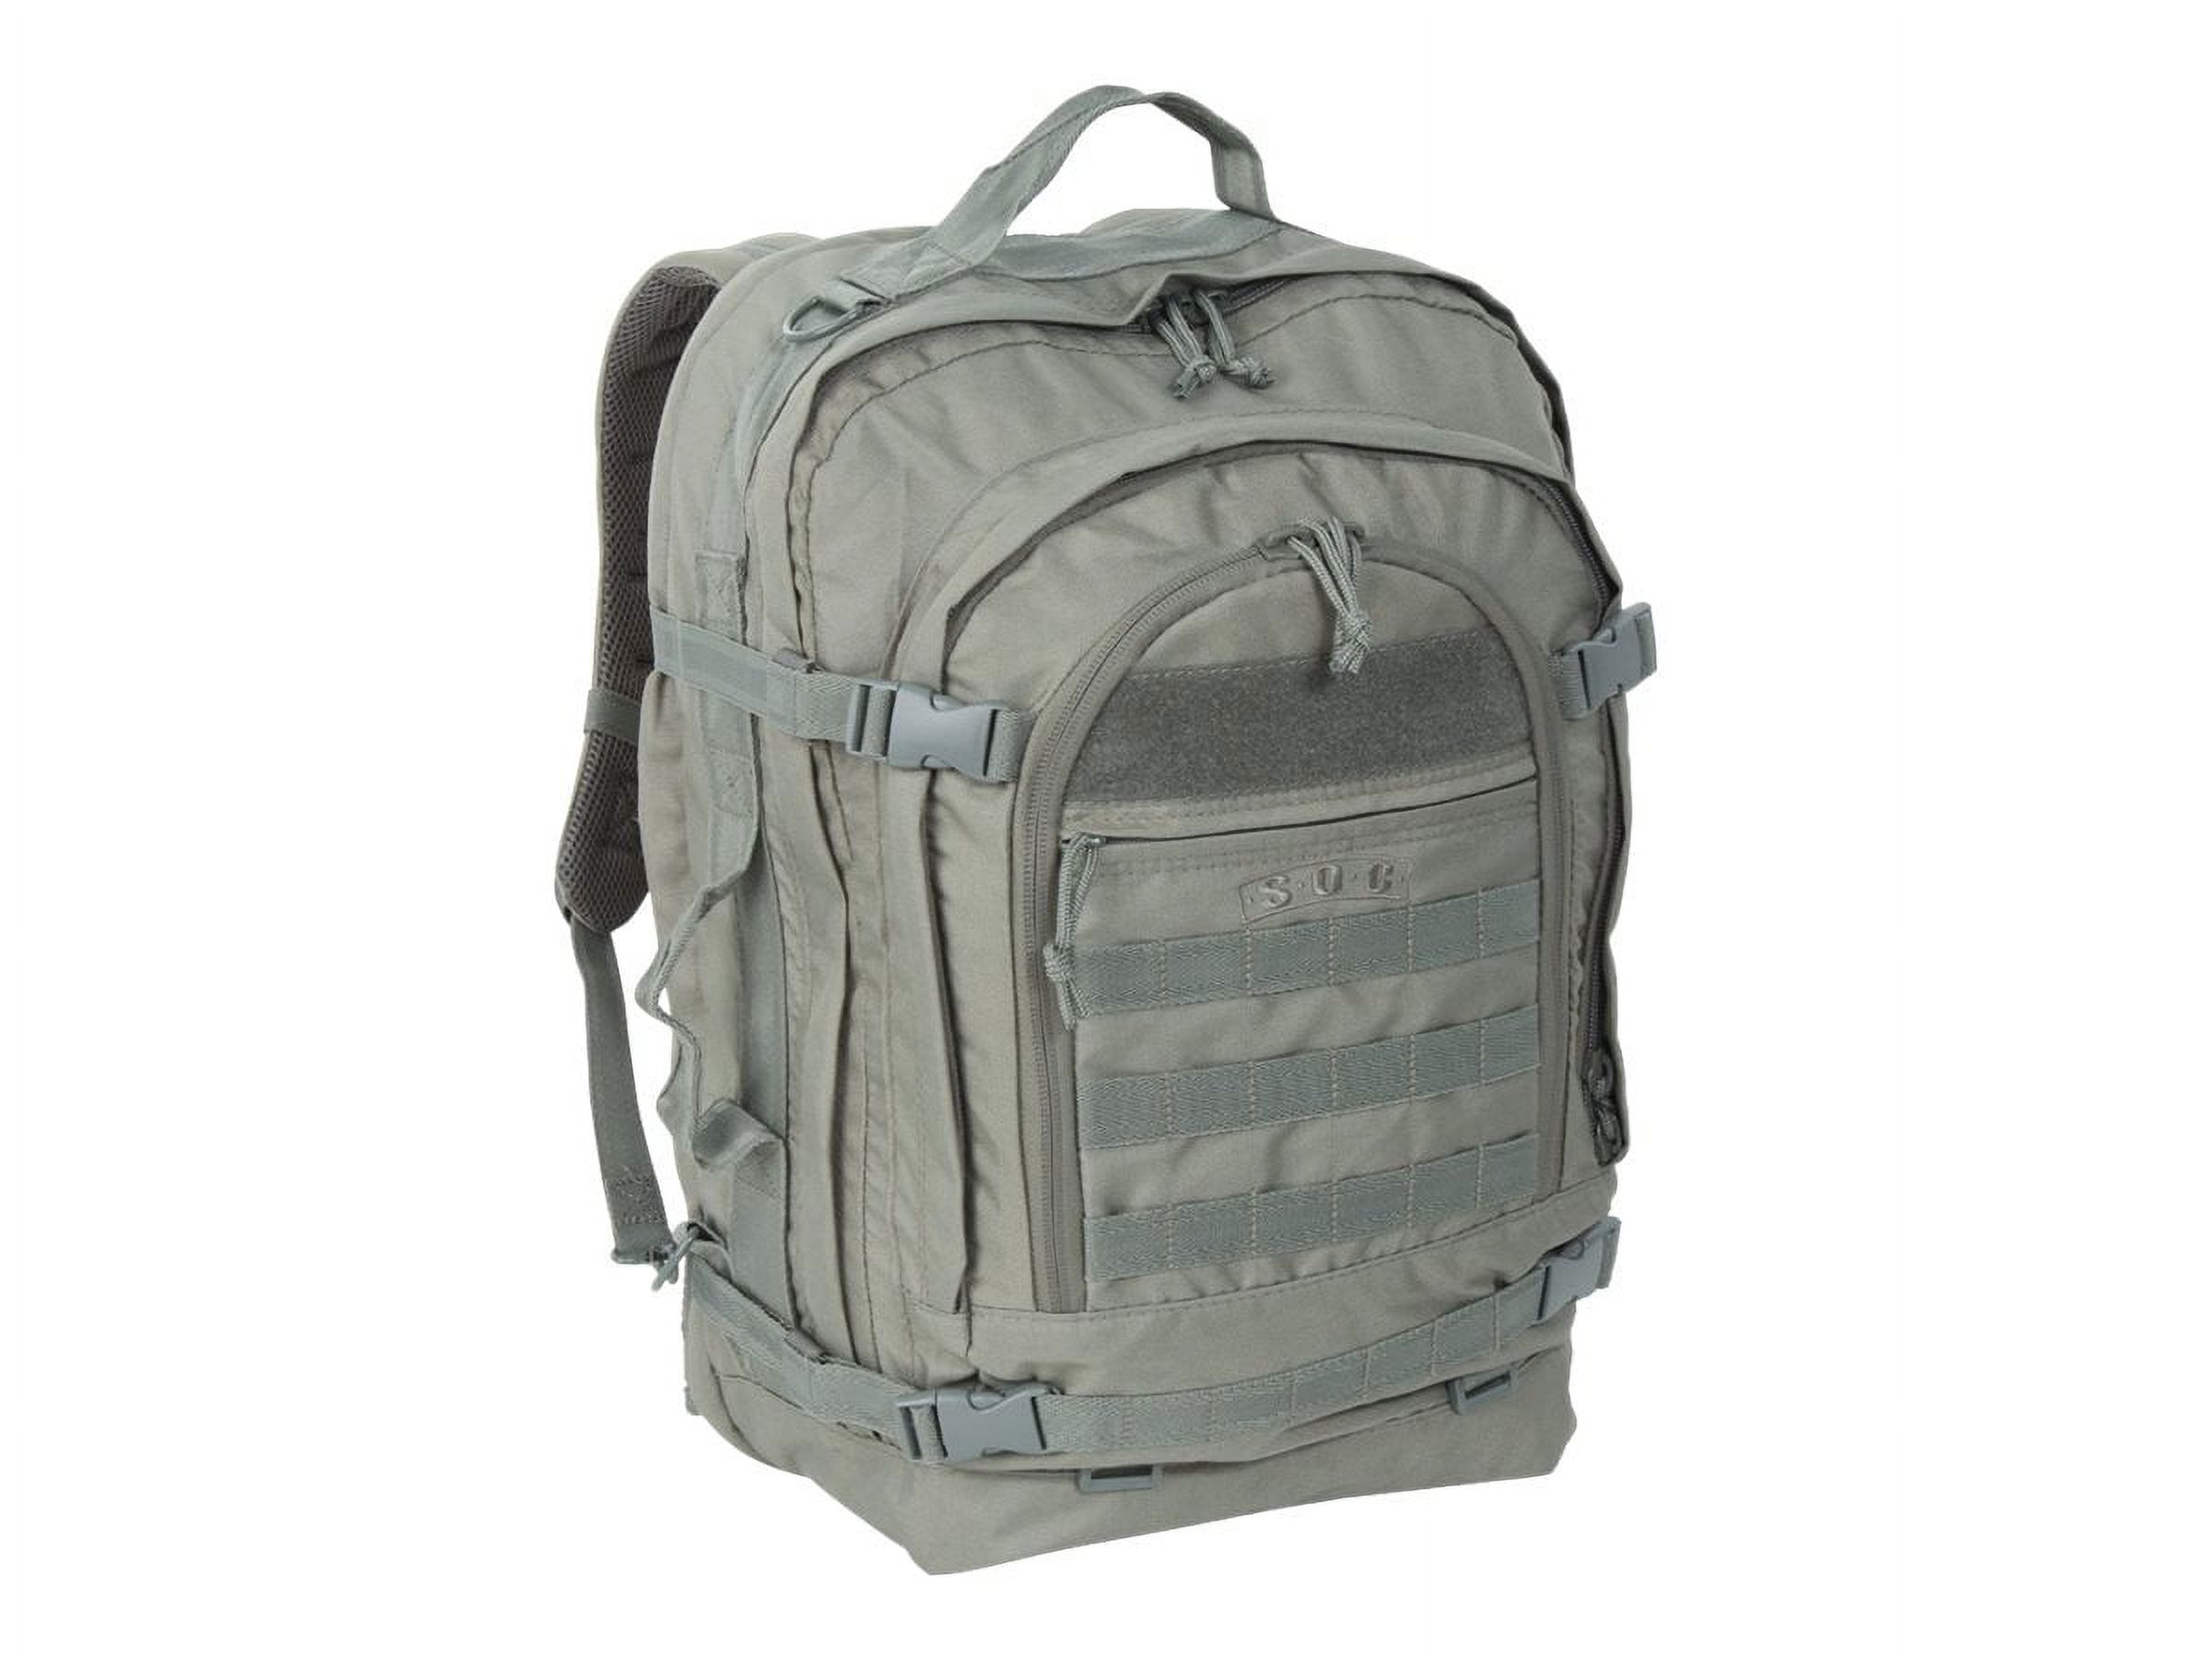 Sandpiper of California Bugout Bag - Backpack L size - 600D poly canvas - foliage green - image 1 of 3